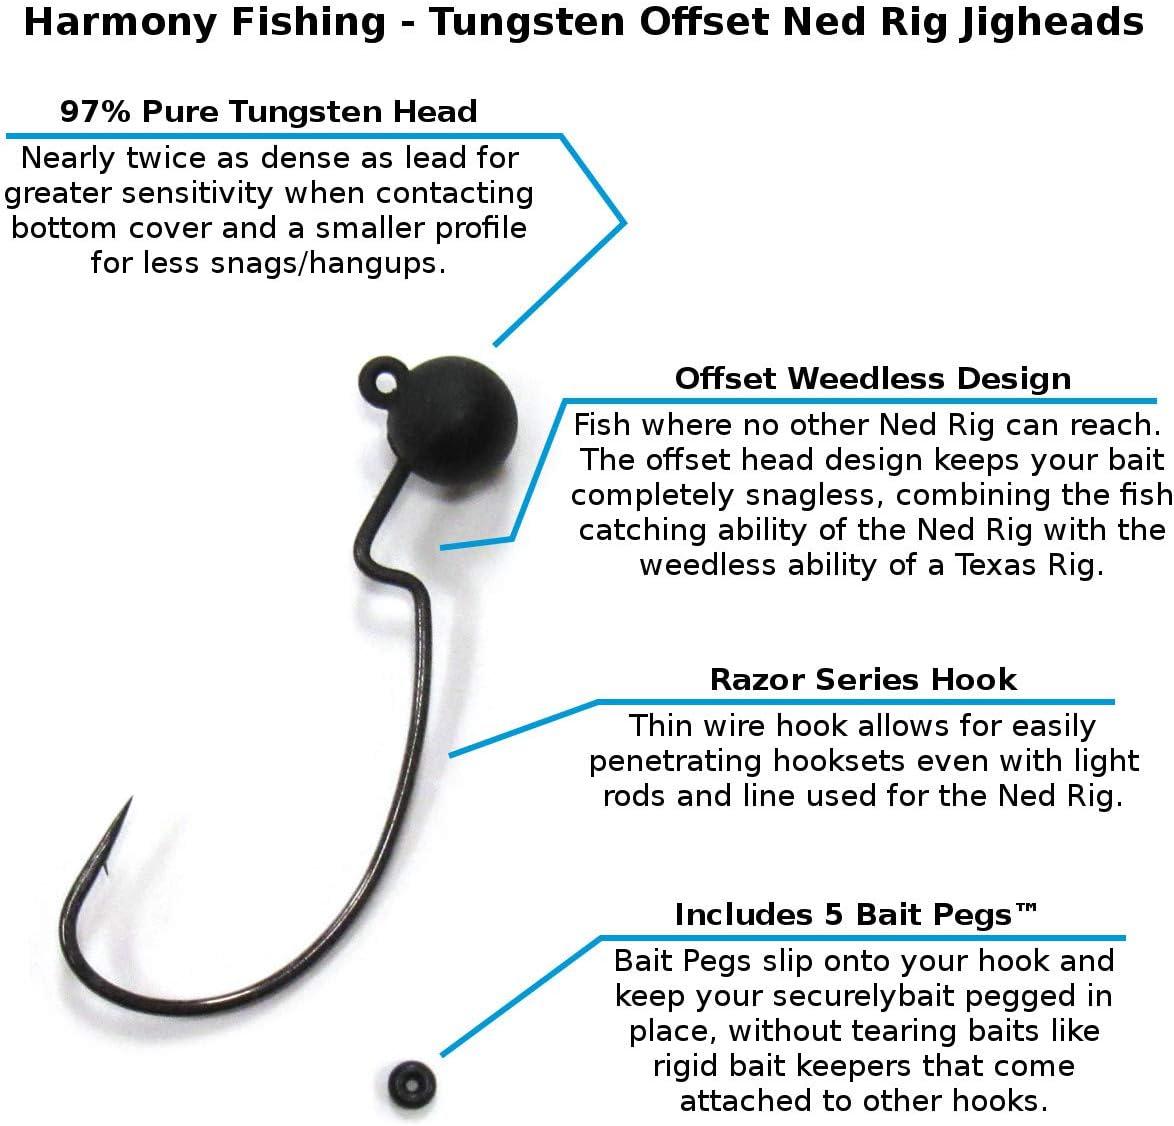 Harmony Fishing - Tungsten Offset Weedless Ned Rig Jigheads (5 Pack) 1/8oz  (5 Pack)